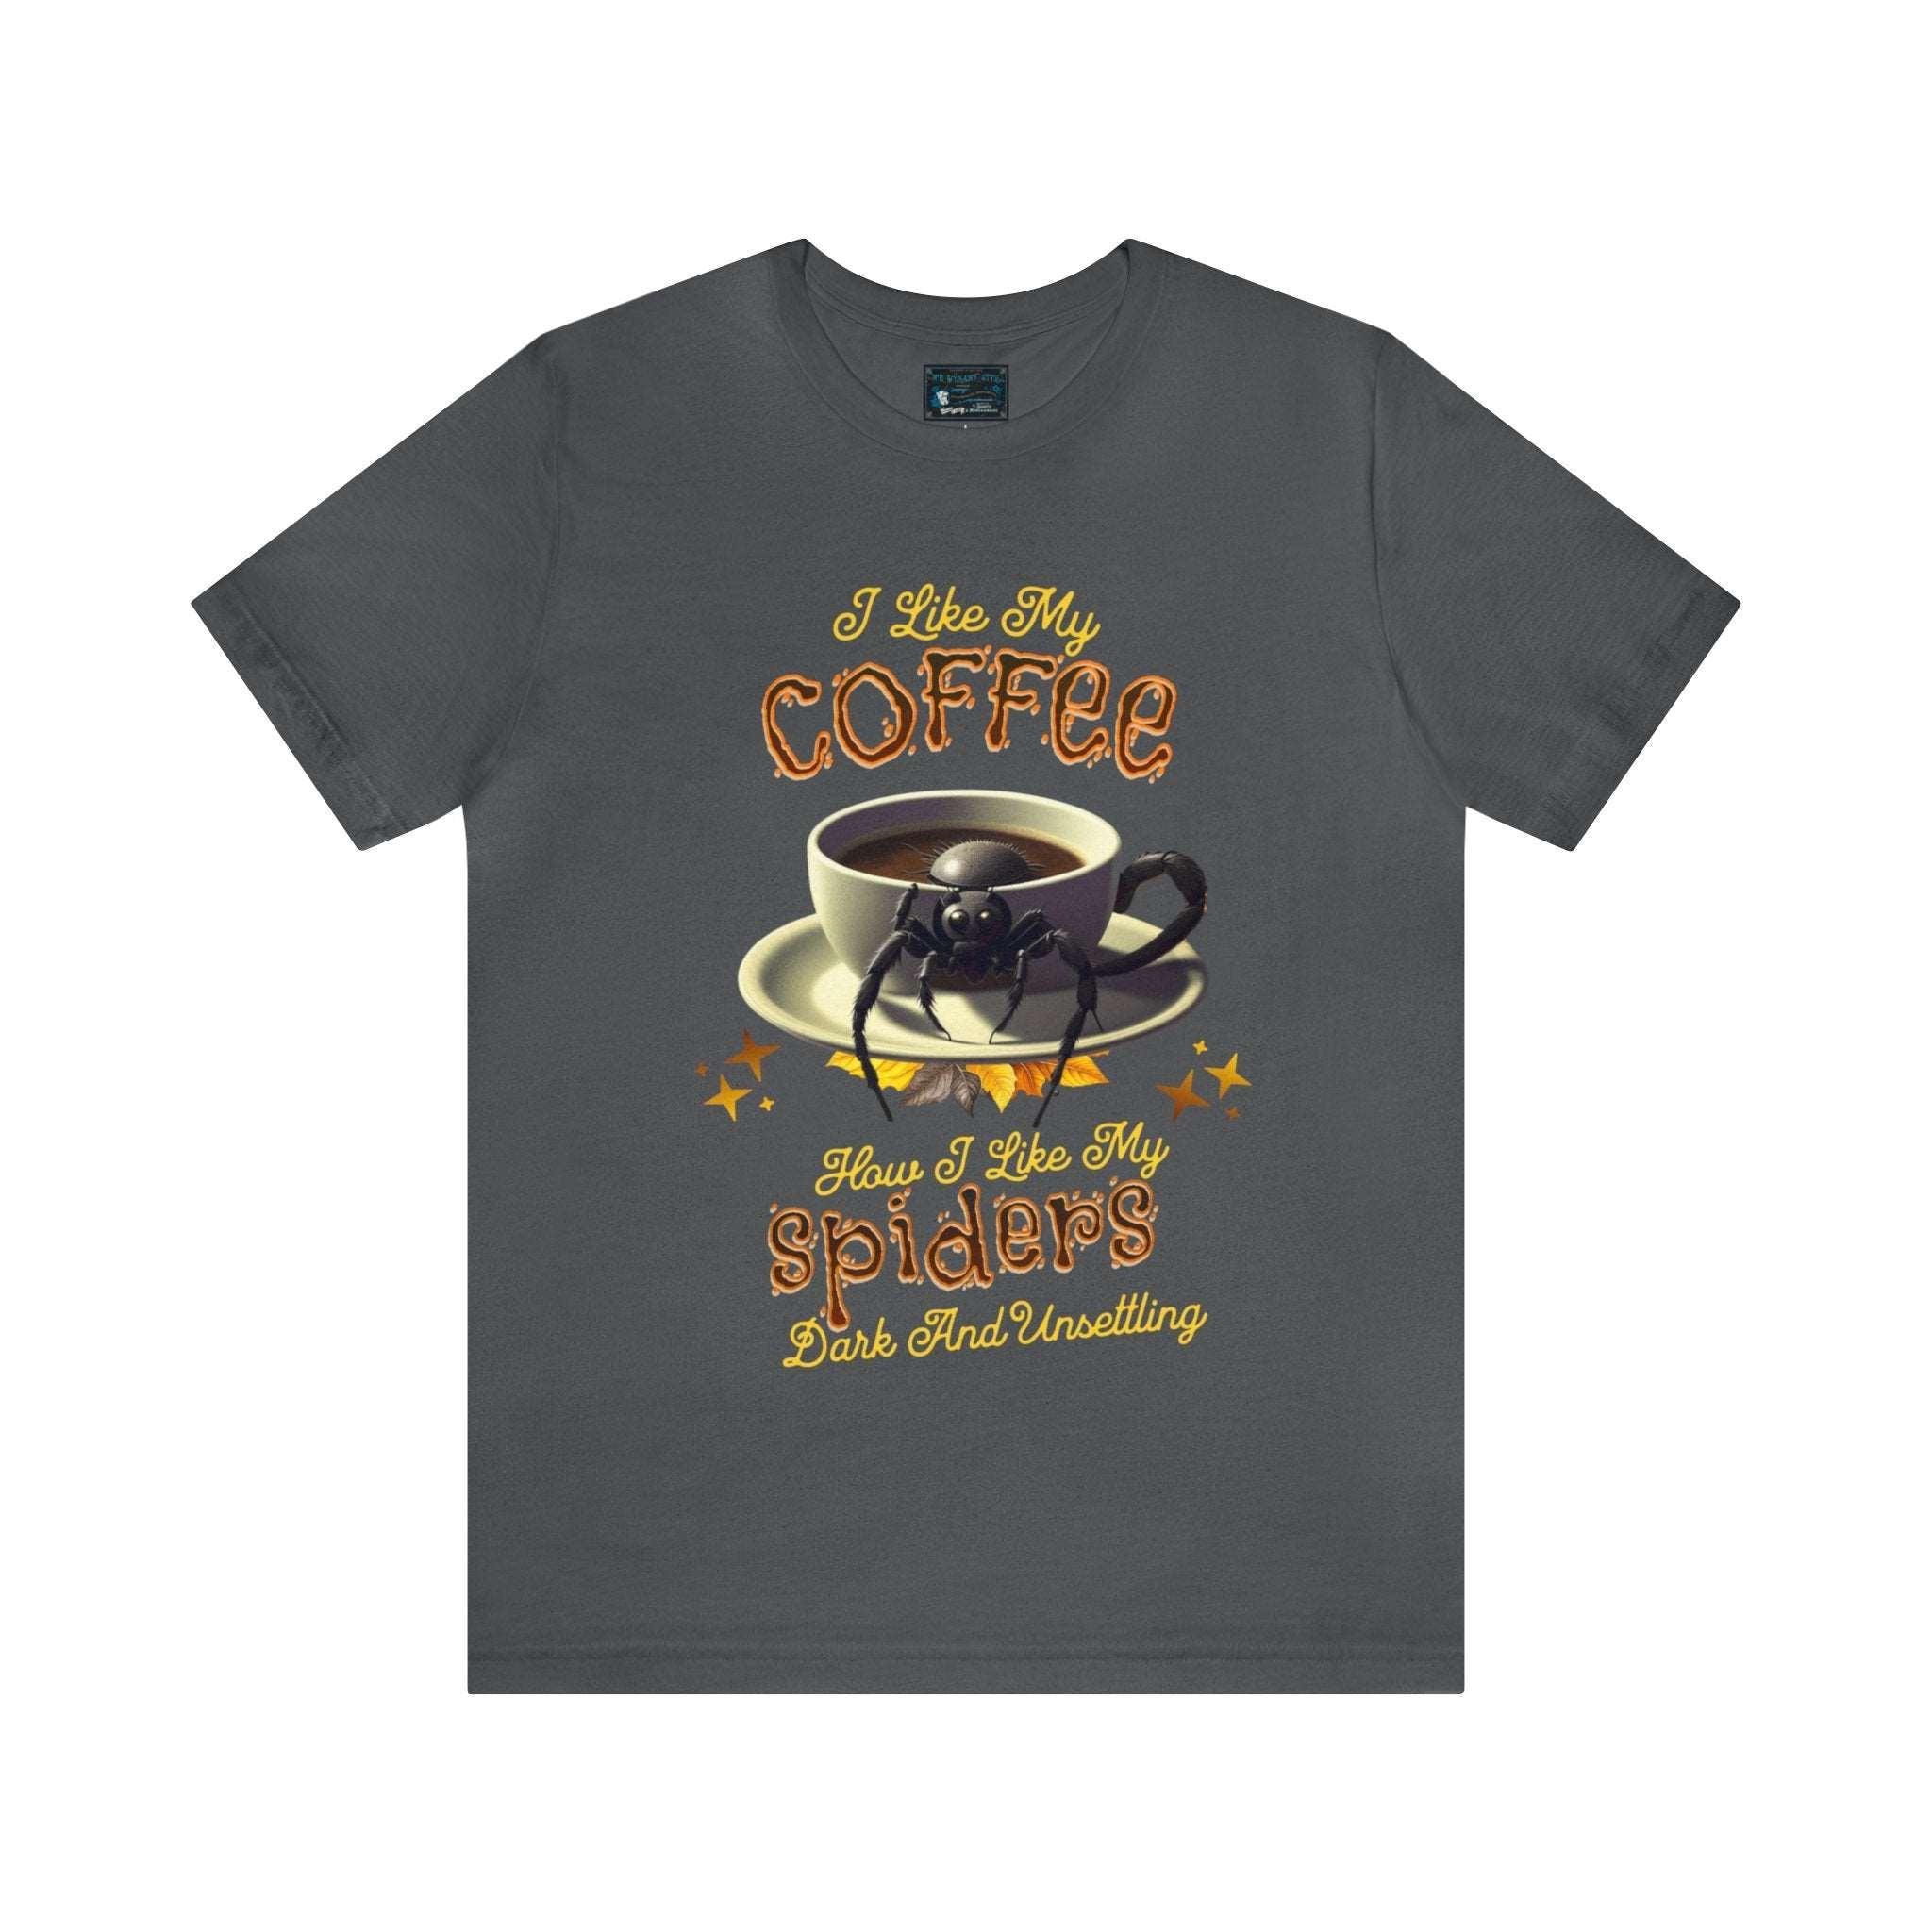 a t - shirt with a cup of coffee on it